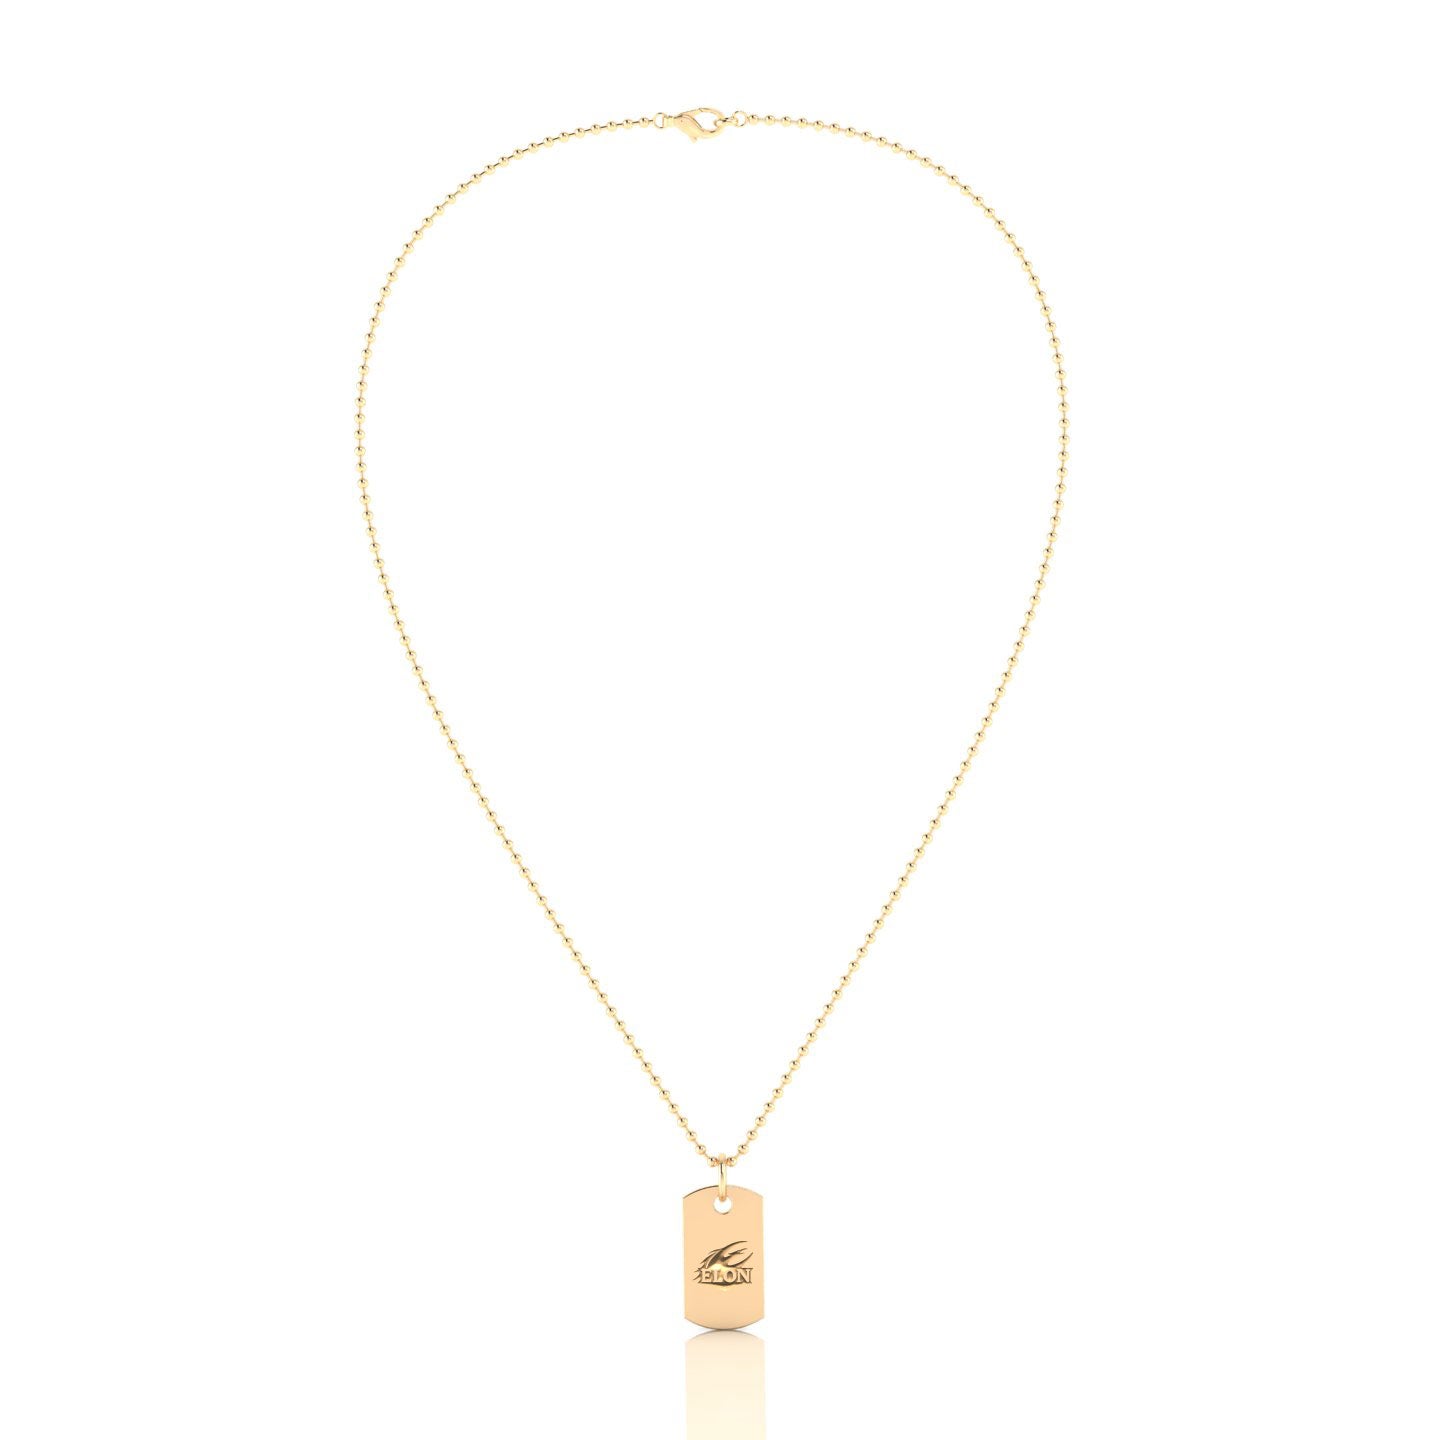 A photo of the Elon Squadra Pendant Too in 14kt yellow gold. The pendant is on a white background.